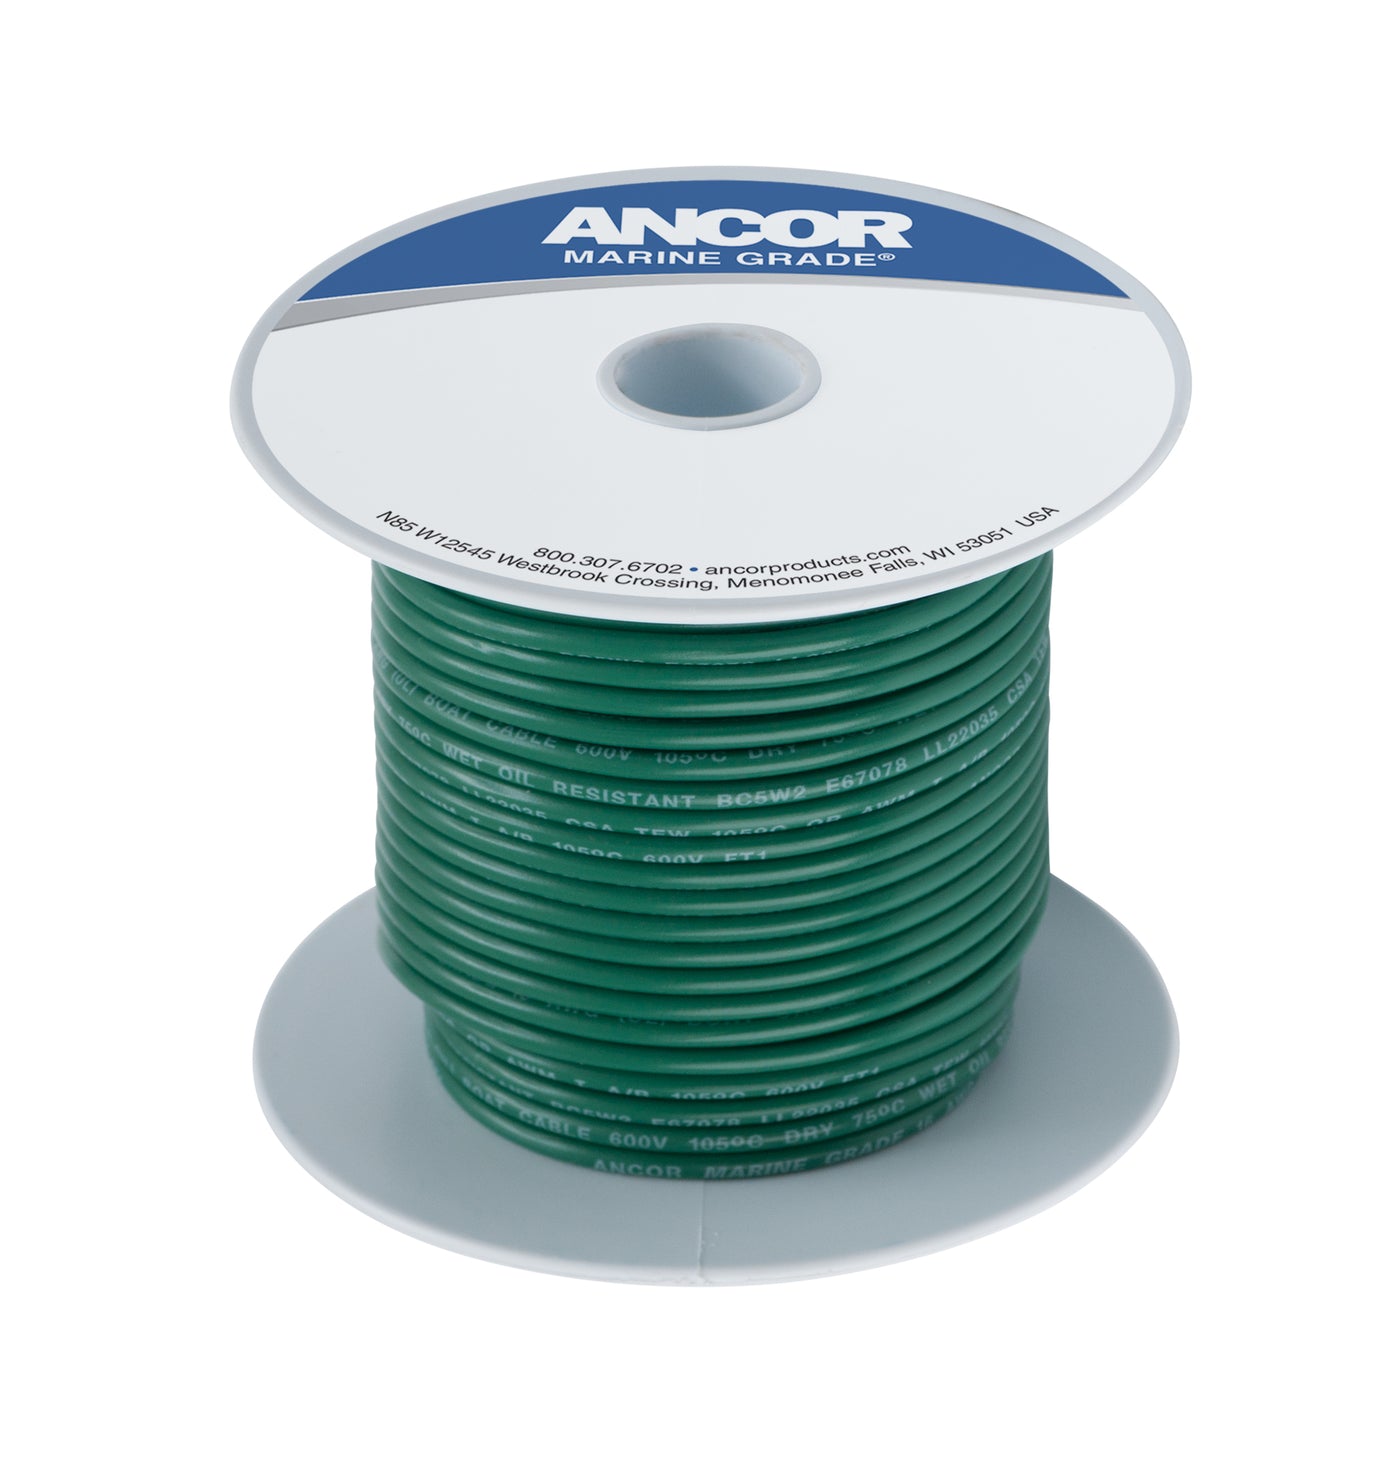 Ancor 108302 Tinned Copper Wire, 10 AWG (5mm²), Green - 25ft